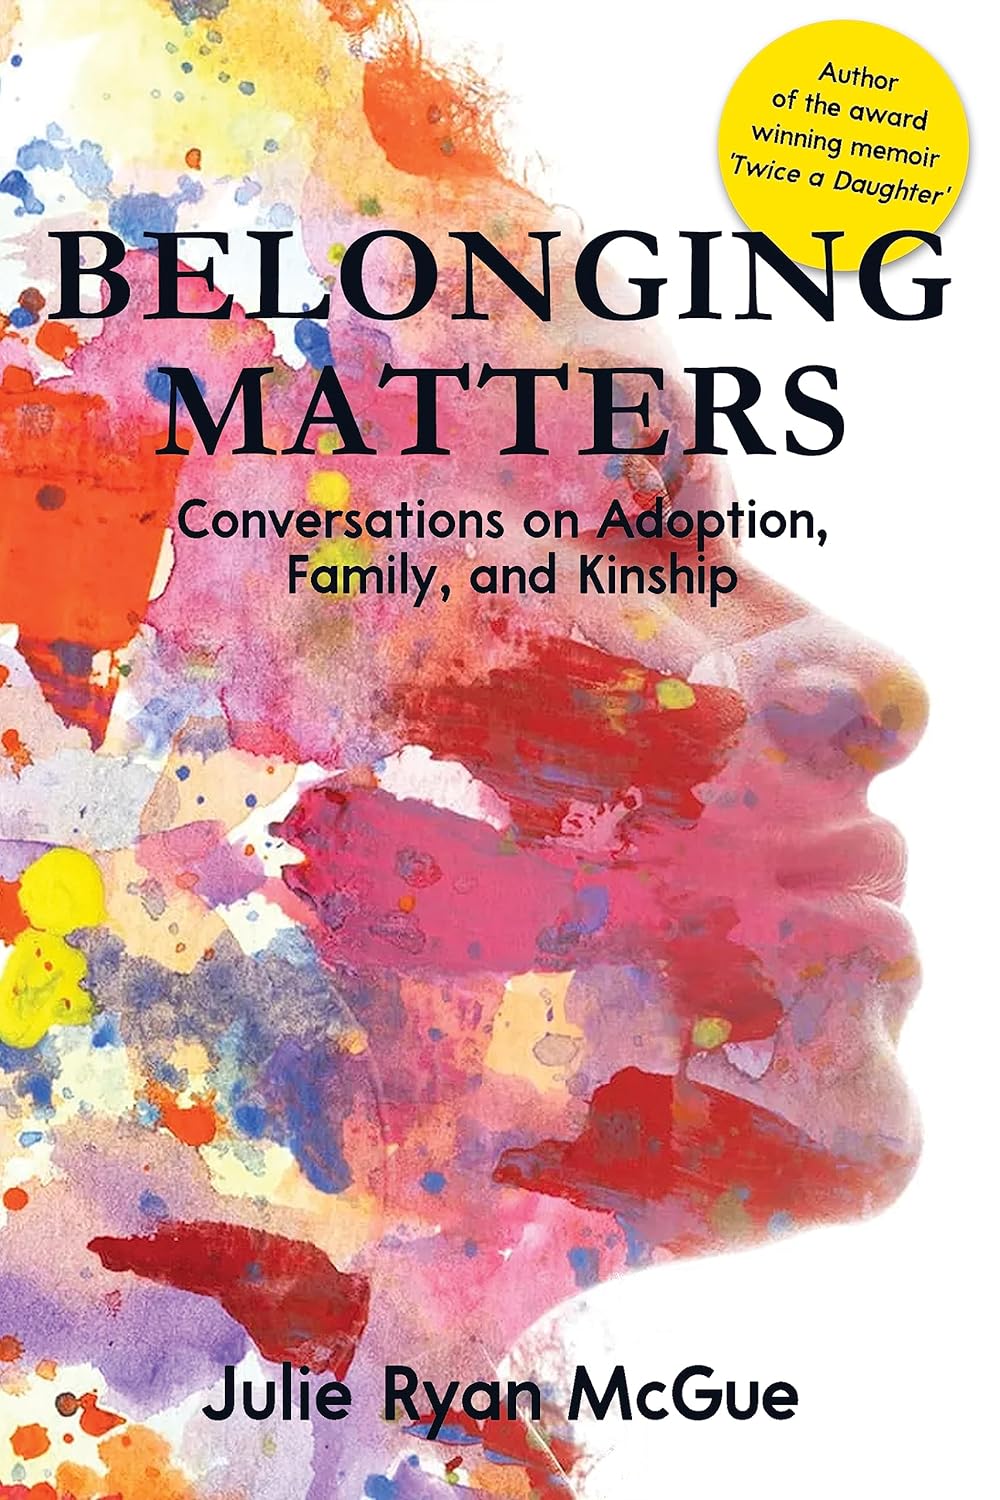 Part 4: Interview with Julie Ryan McGue, Author of Belonging Matters